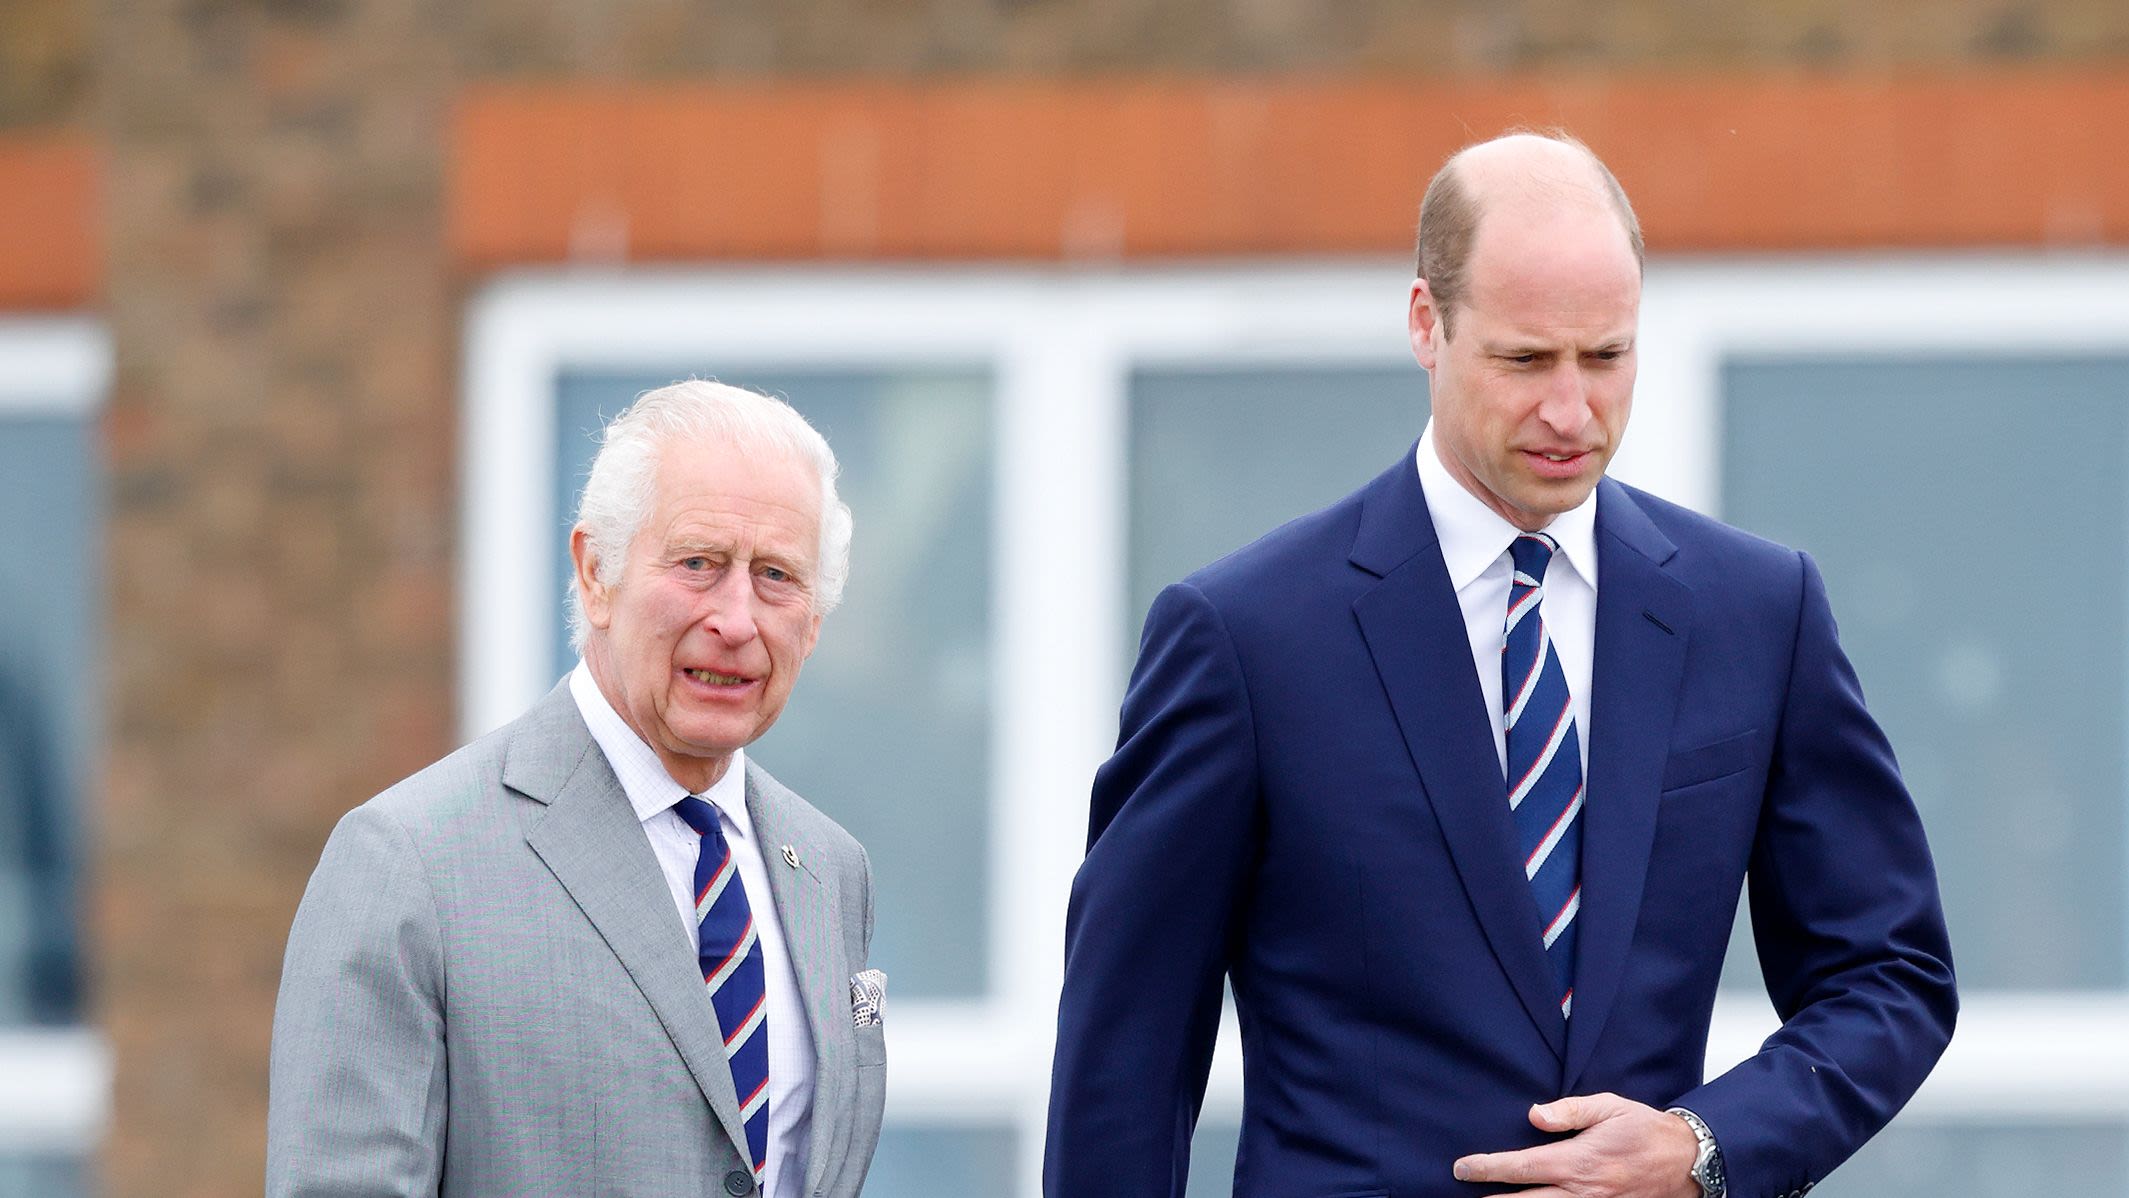 A Royal Staffer Reveals Prince William Is "Preventing" King Charles from Seeing Prince Harry